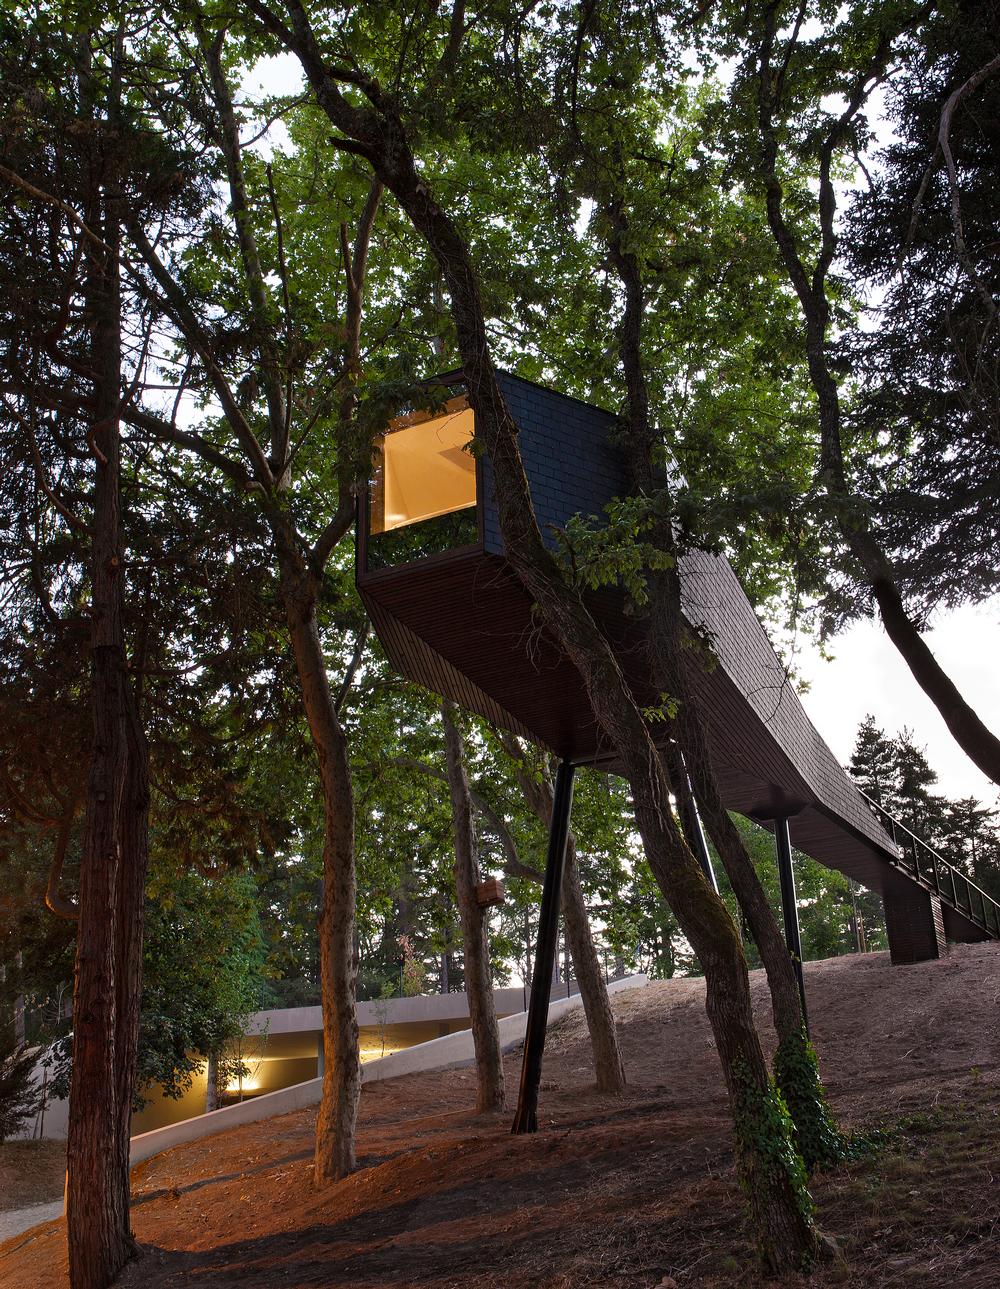 The Tree Houses are clad in slate and wood, helping them to blend into their surroundings